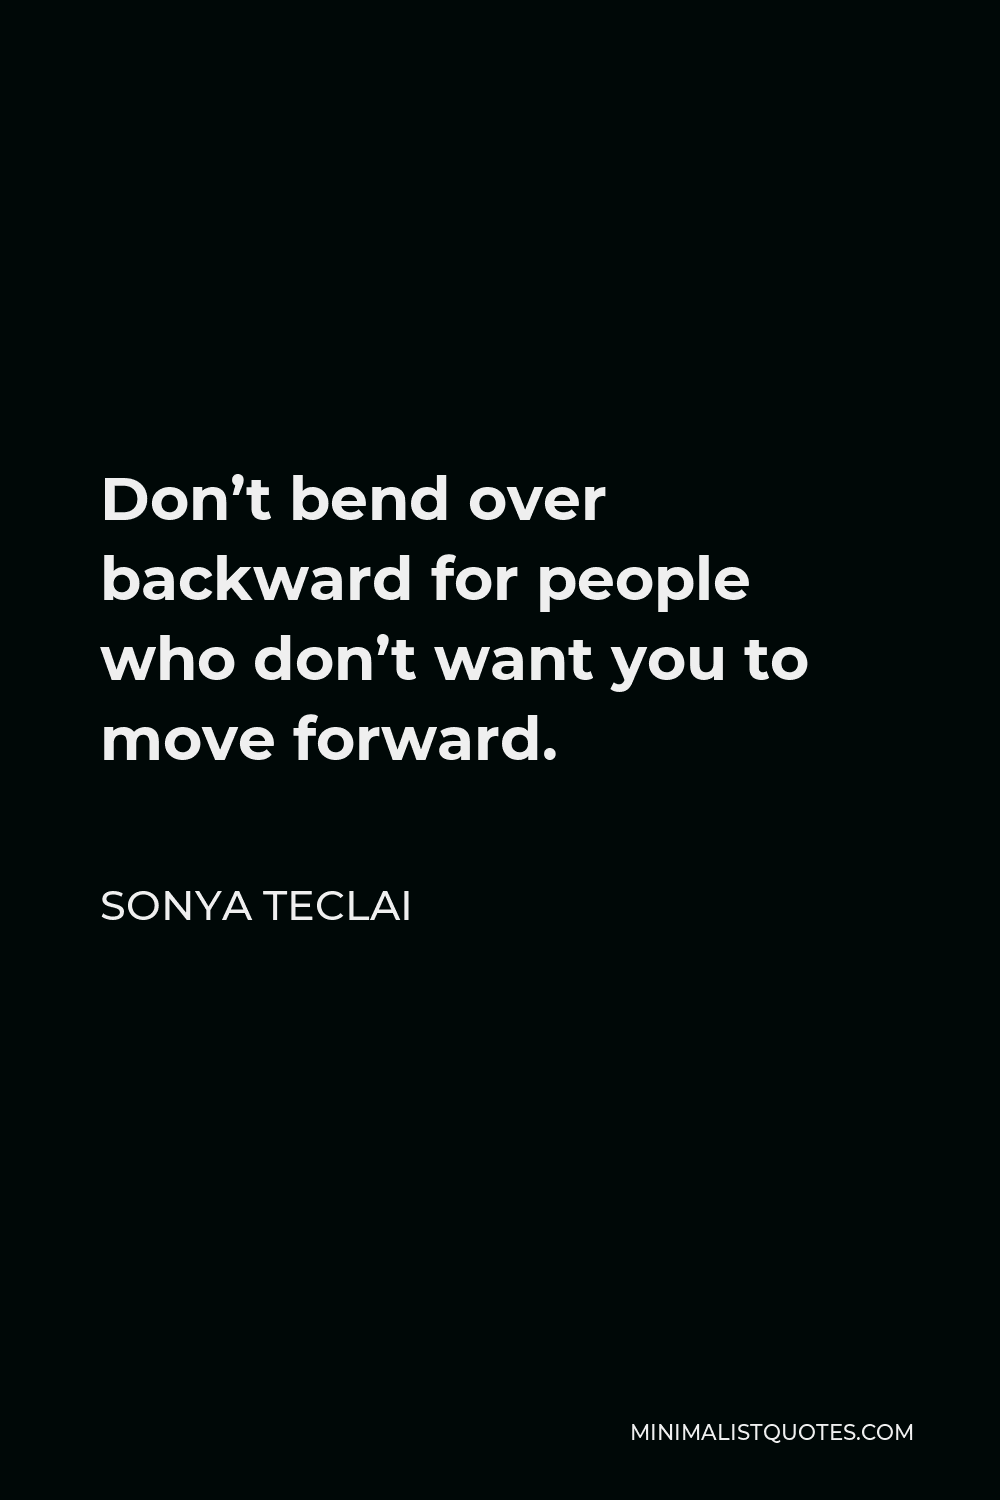 Sonya Teclai Quote - Don’t bend over backward for people who don’t want you to move forward.